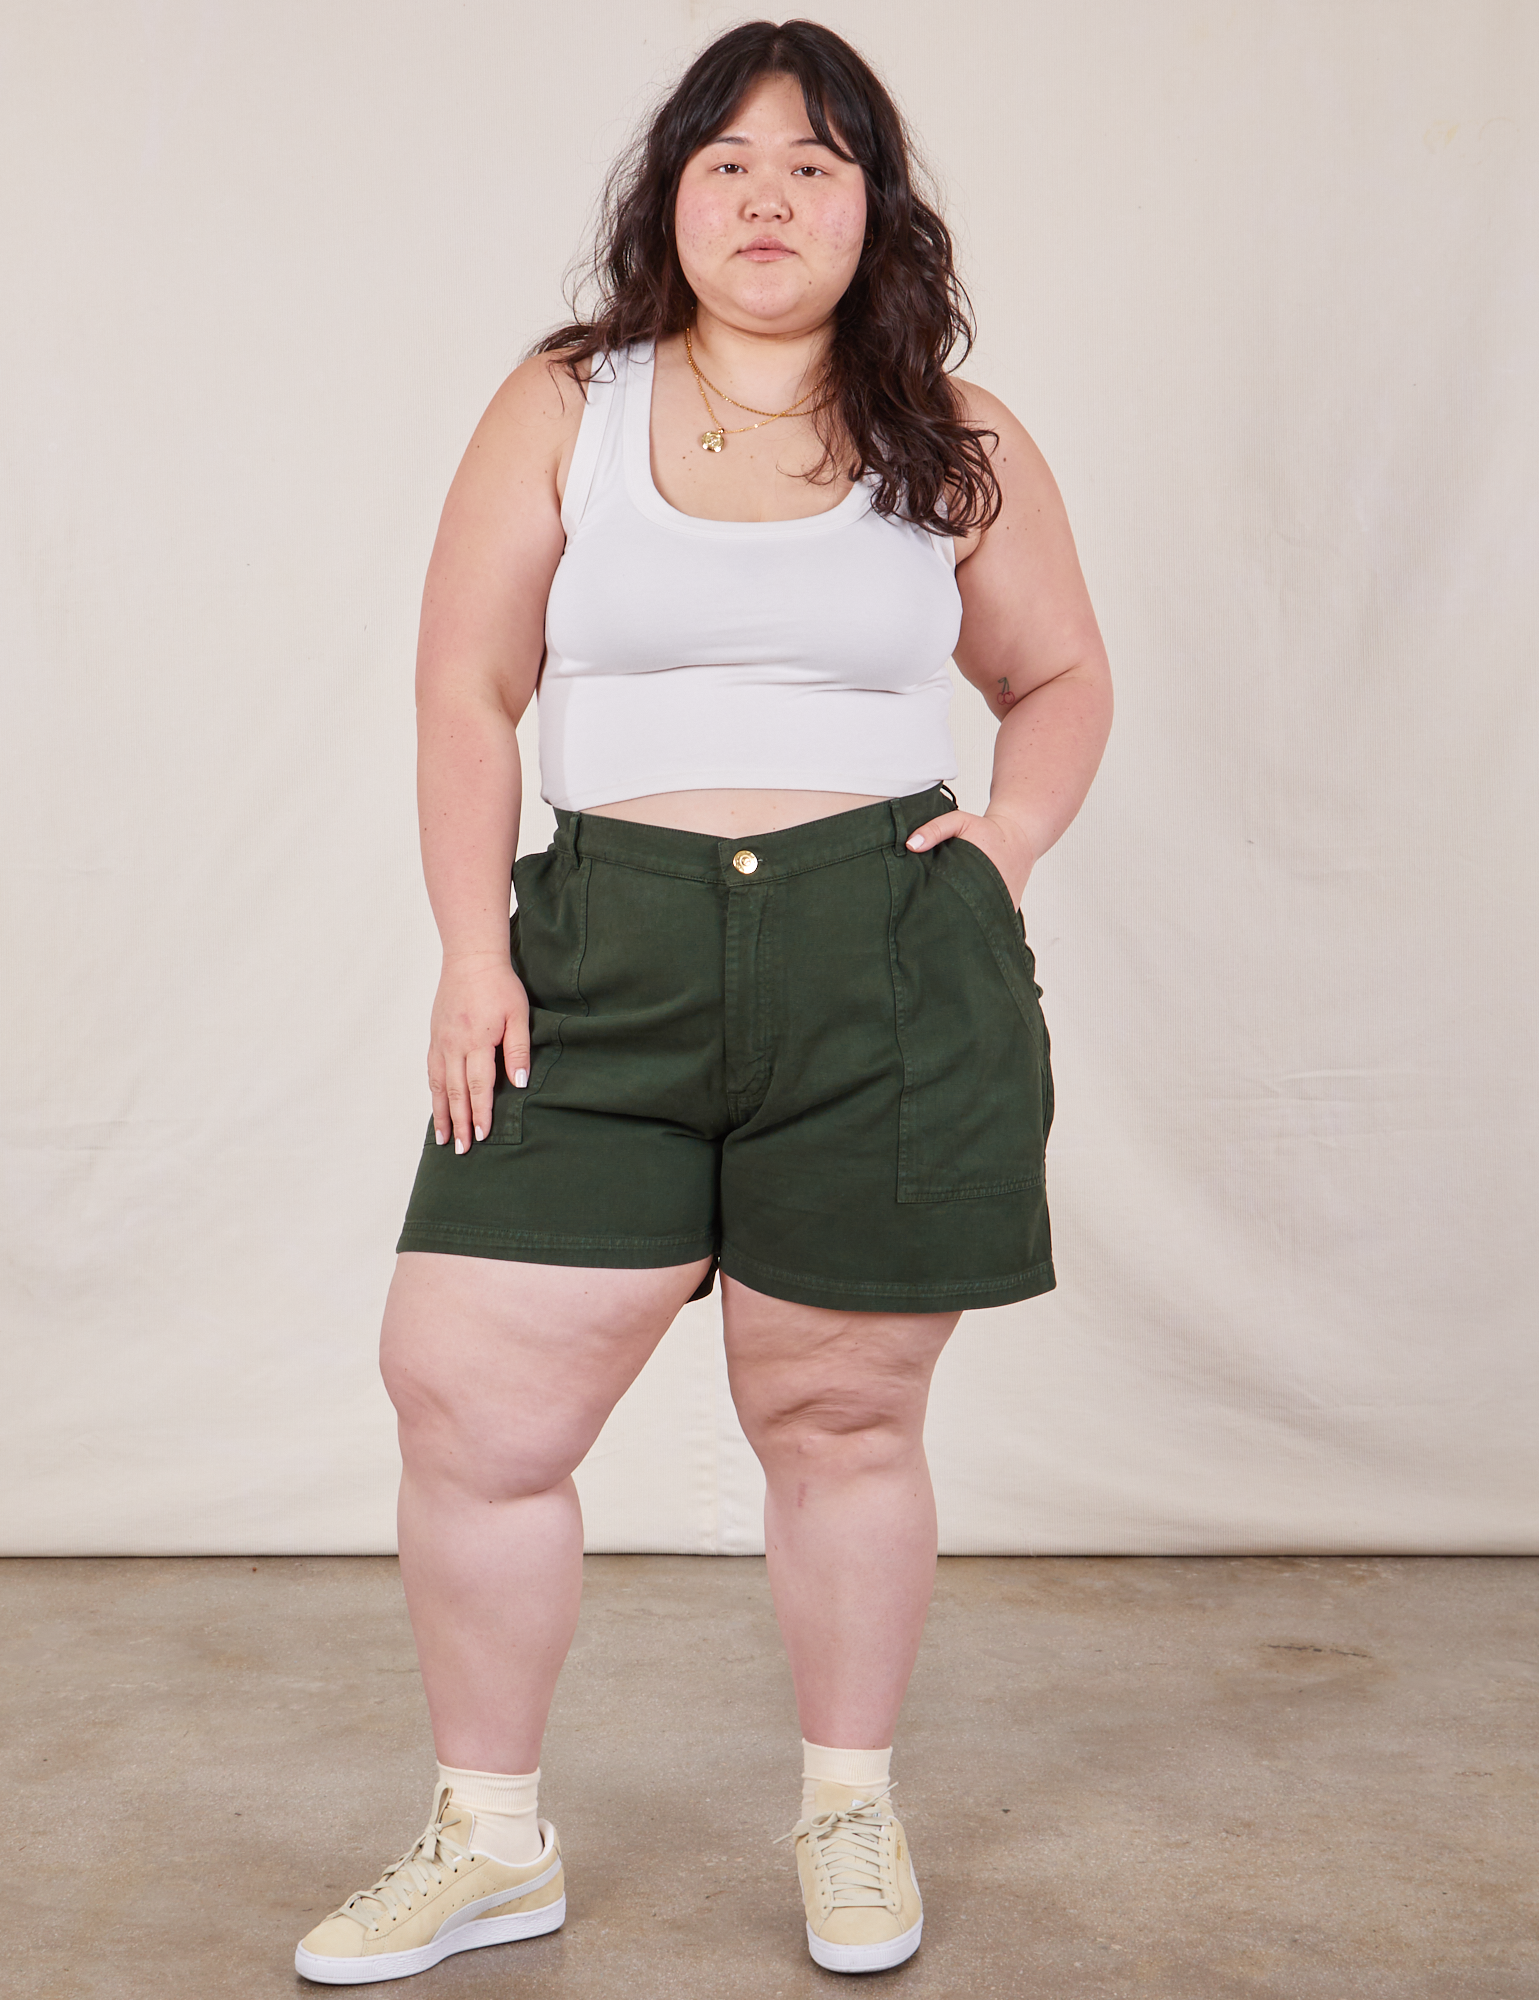 Ashley is 5’7” and wearing 1XL Classic Work Shorts in Swamp Green paired with a Cropped Tank Top in vintage tee off-white